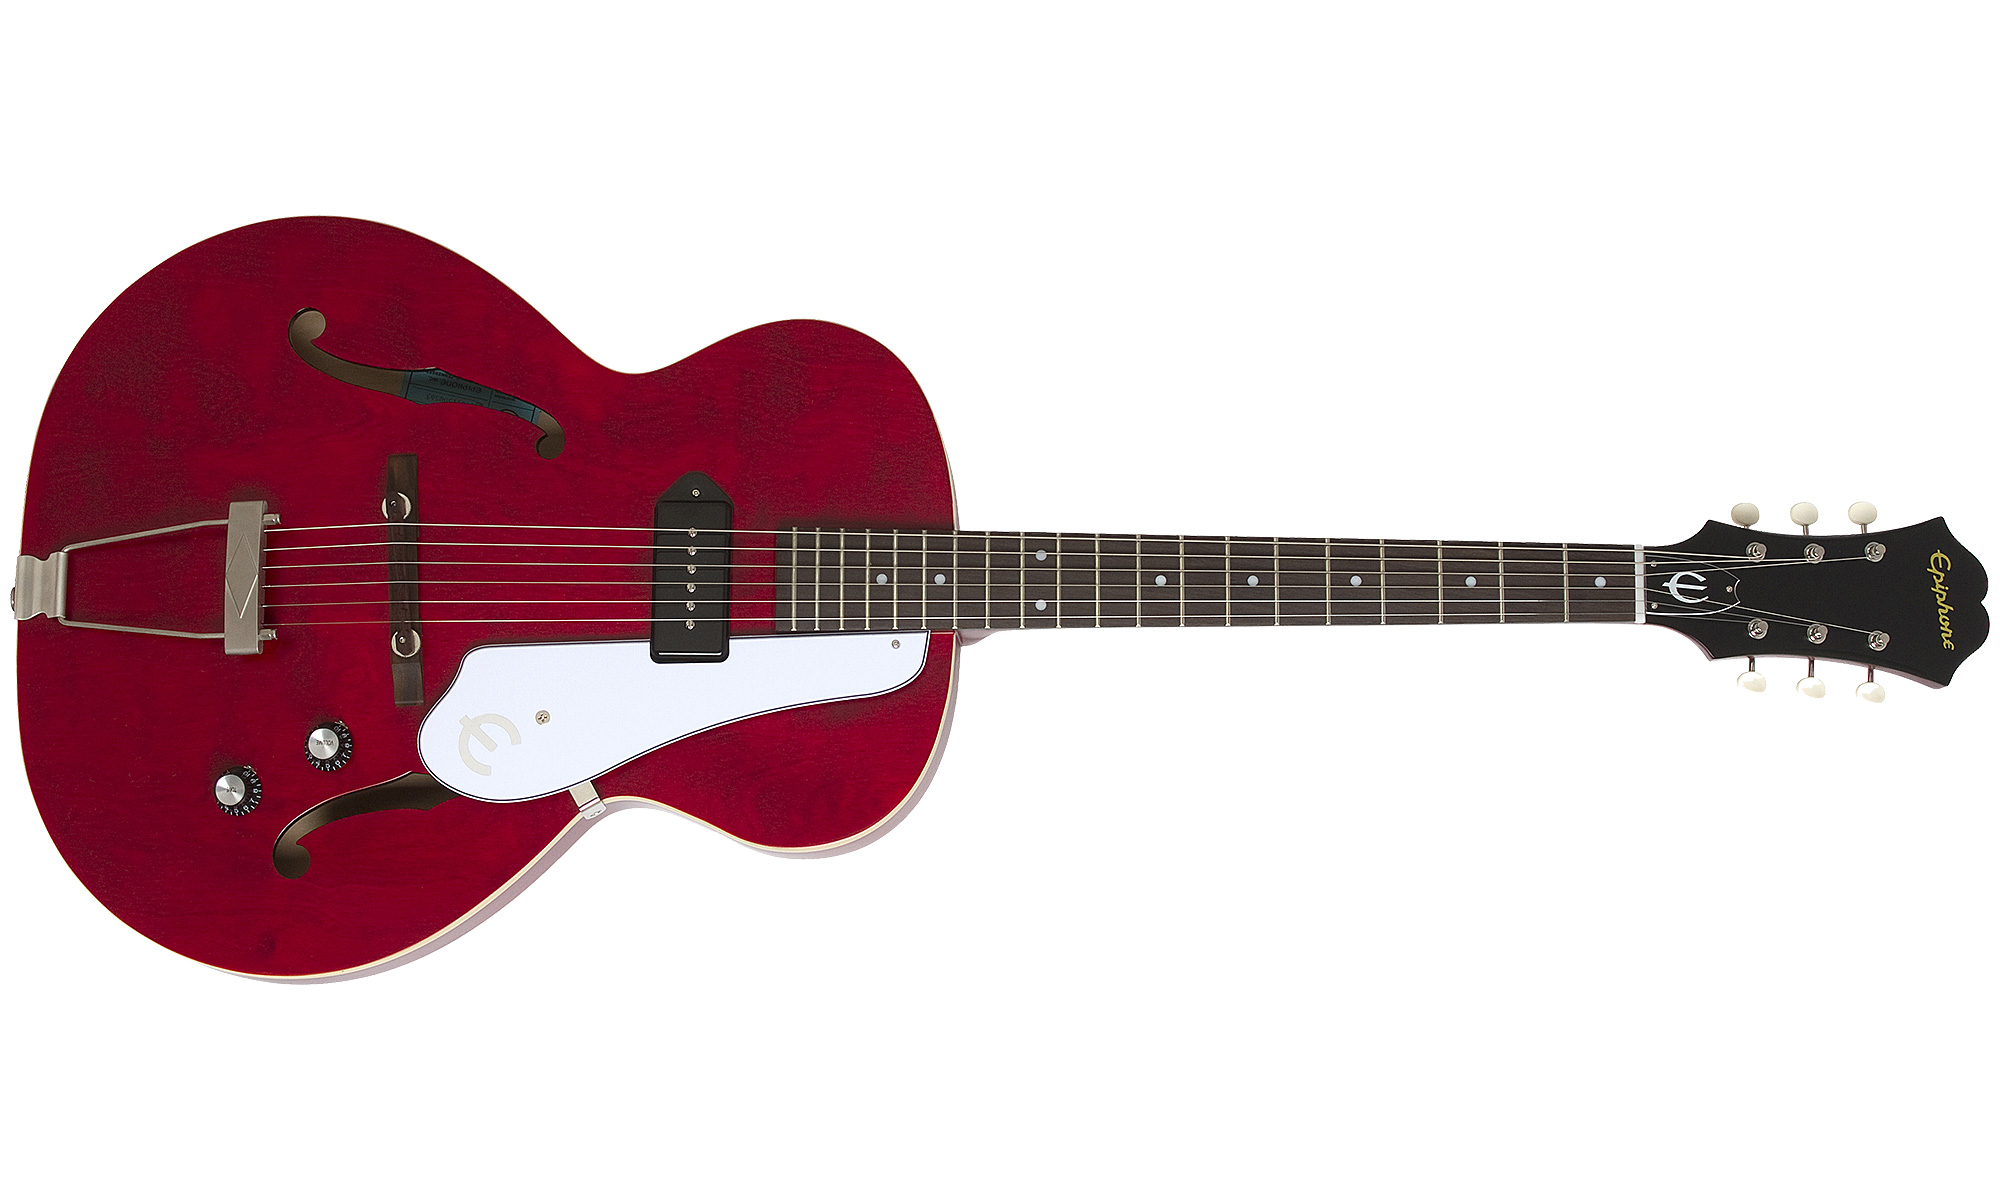 Epiphone Inspired By 1966 Century 2016 - Aged Gloss Cherry - Guitarra eléctrica semi caja - Variation 1